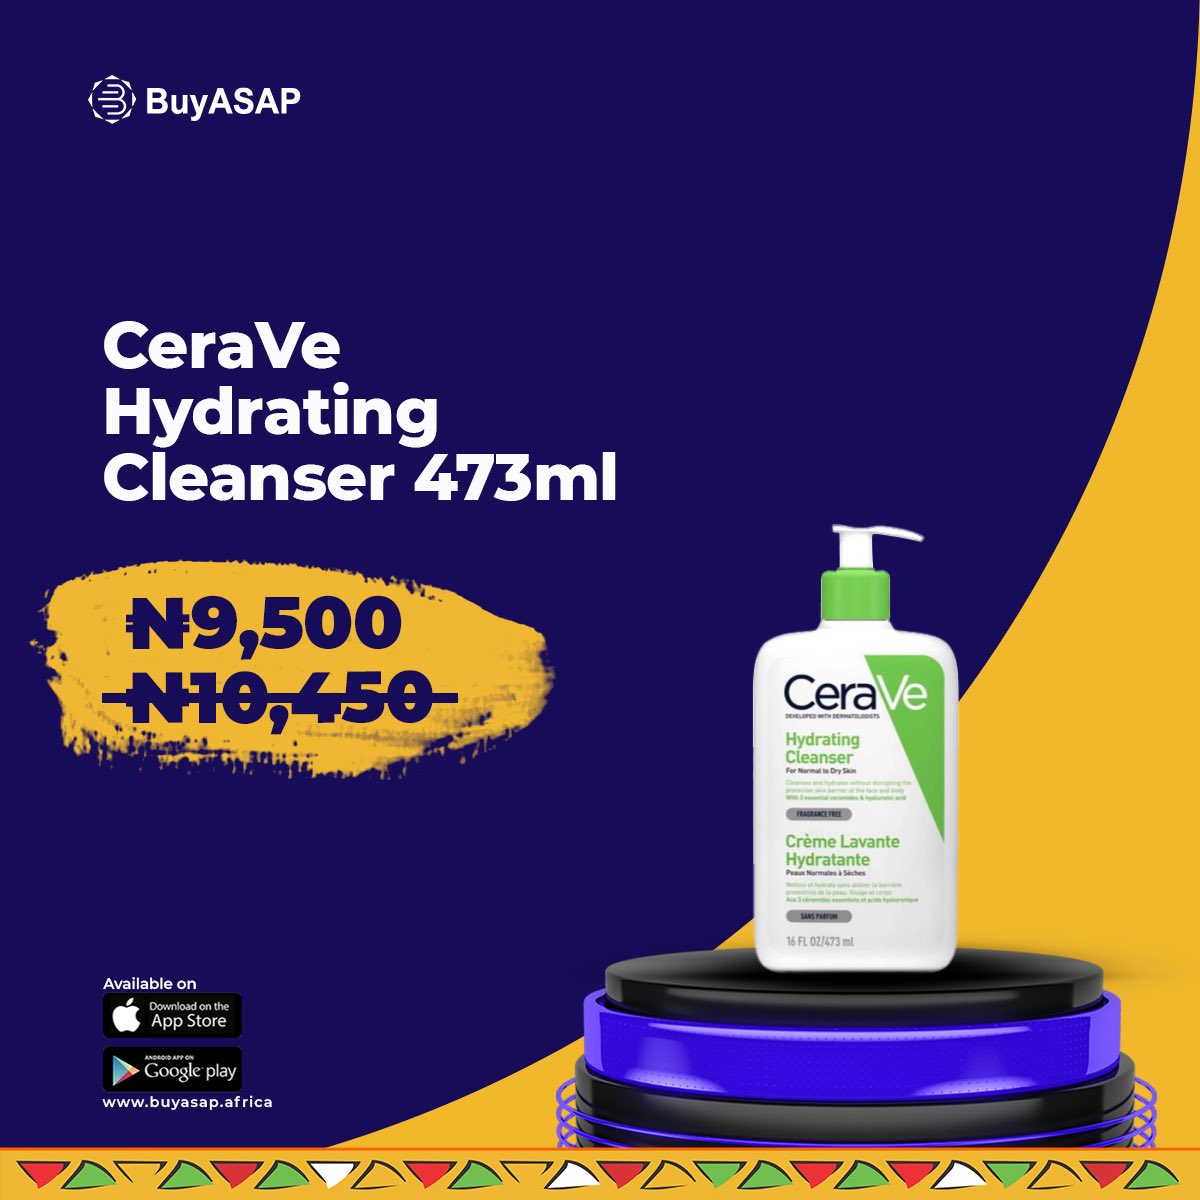 Unleash Your Radiance: Experience the Perfect Beauty Care Regimen for Everyday Bliss.

Indulge in Unbeatable Price Slashes and stock up your beauty essentials.

#GlowAsap #BuyAsap #CeraVe #BuyNowPayLater